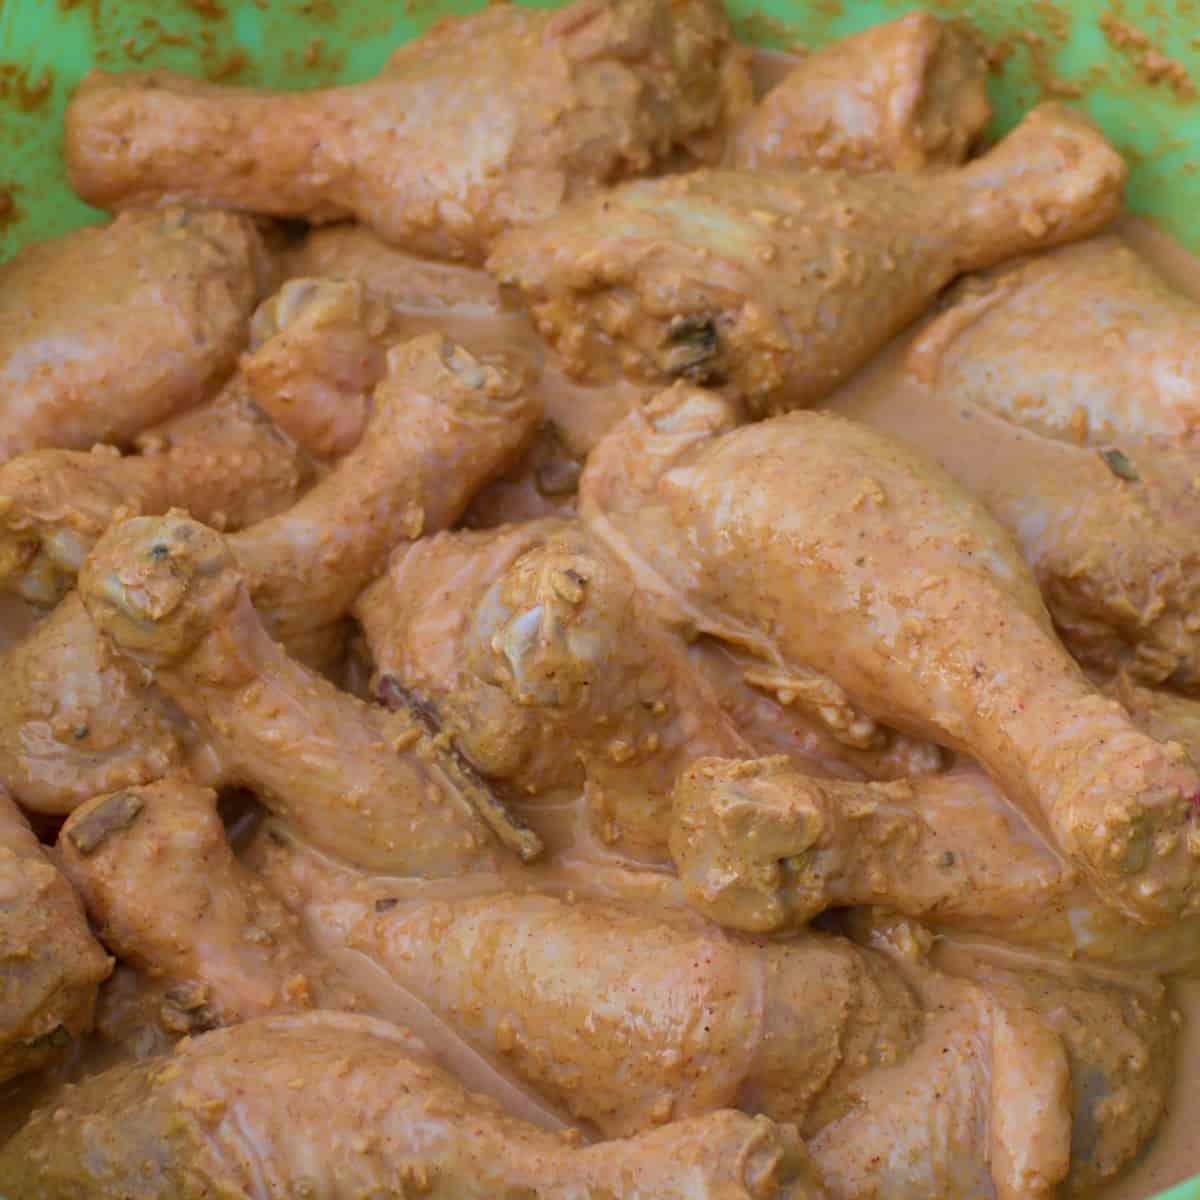 Chicken drumsticks marinating with seasonings in a large bowl.